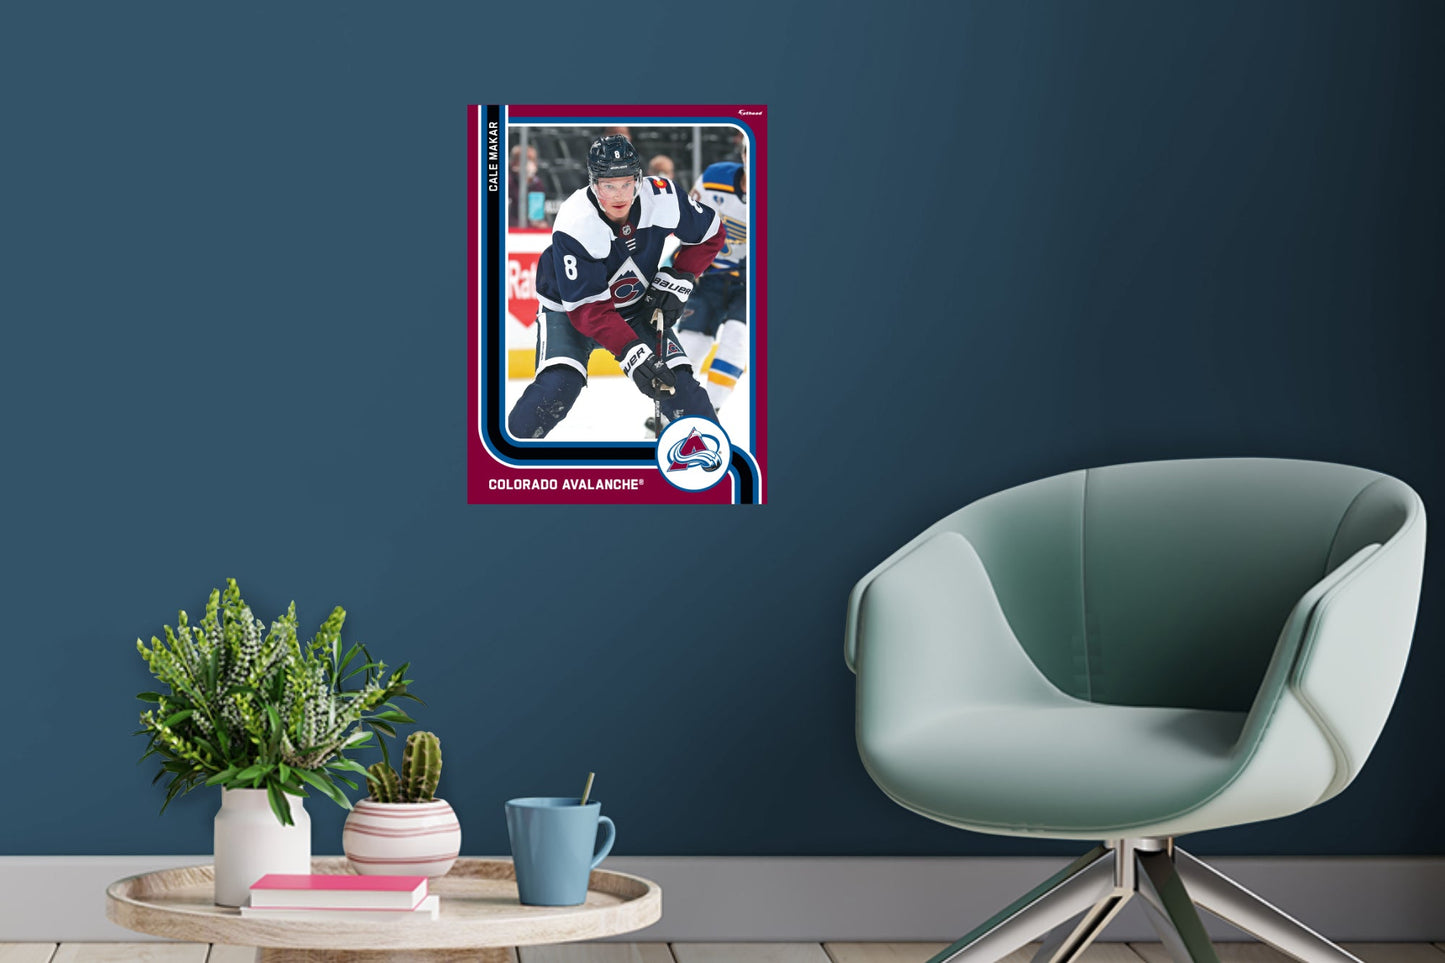 Colorado Avalanche: Cale Makar Poster - Officially Licensed NHL Removable Adhesive Decal